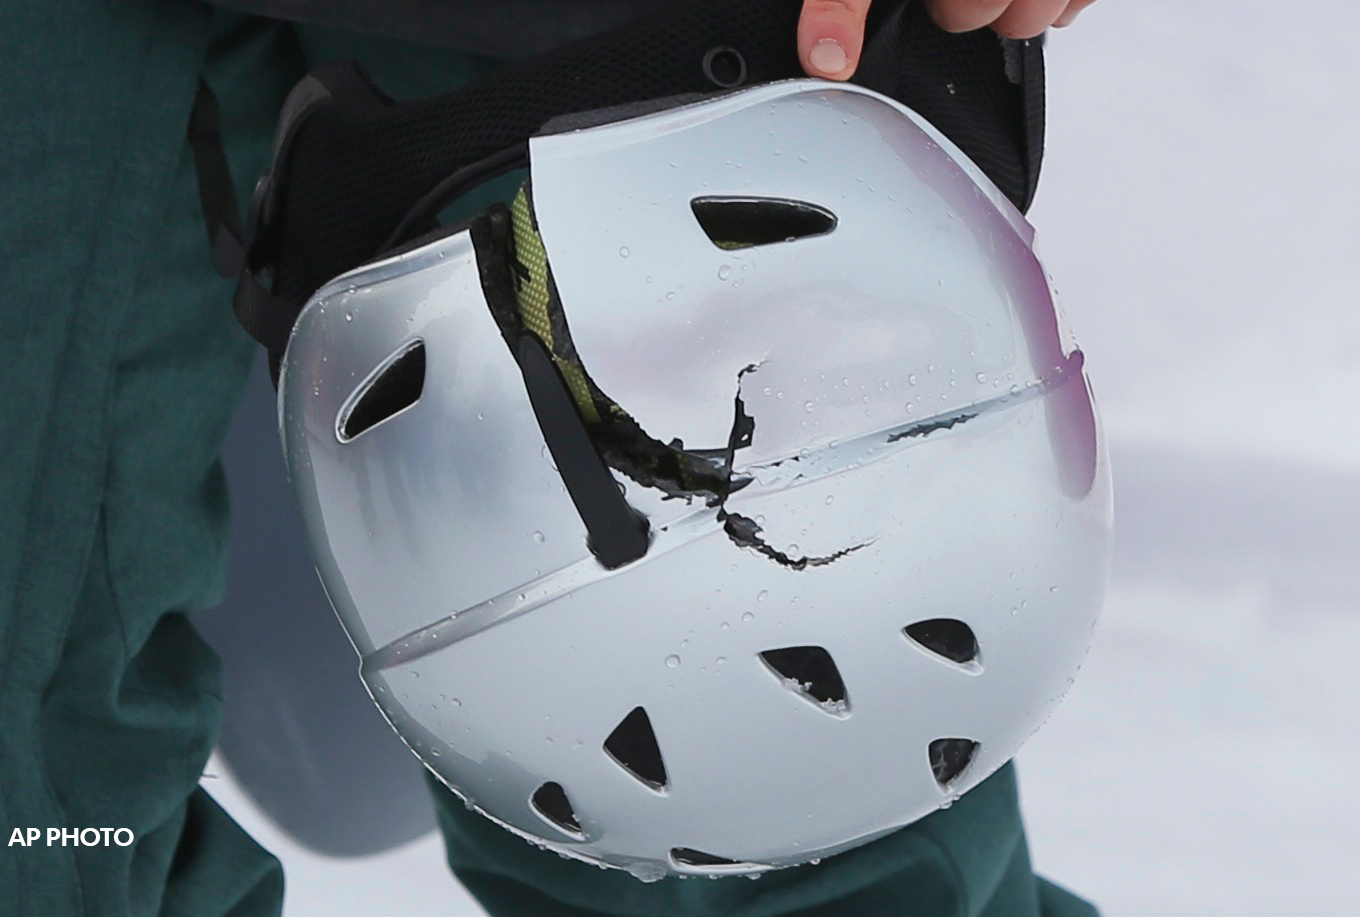 One thing you should always bring is your helmet, saved my life numerous times.